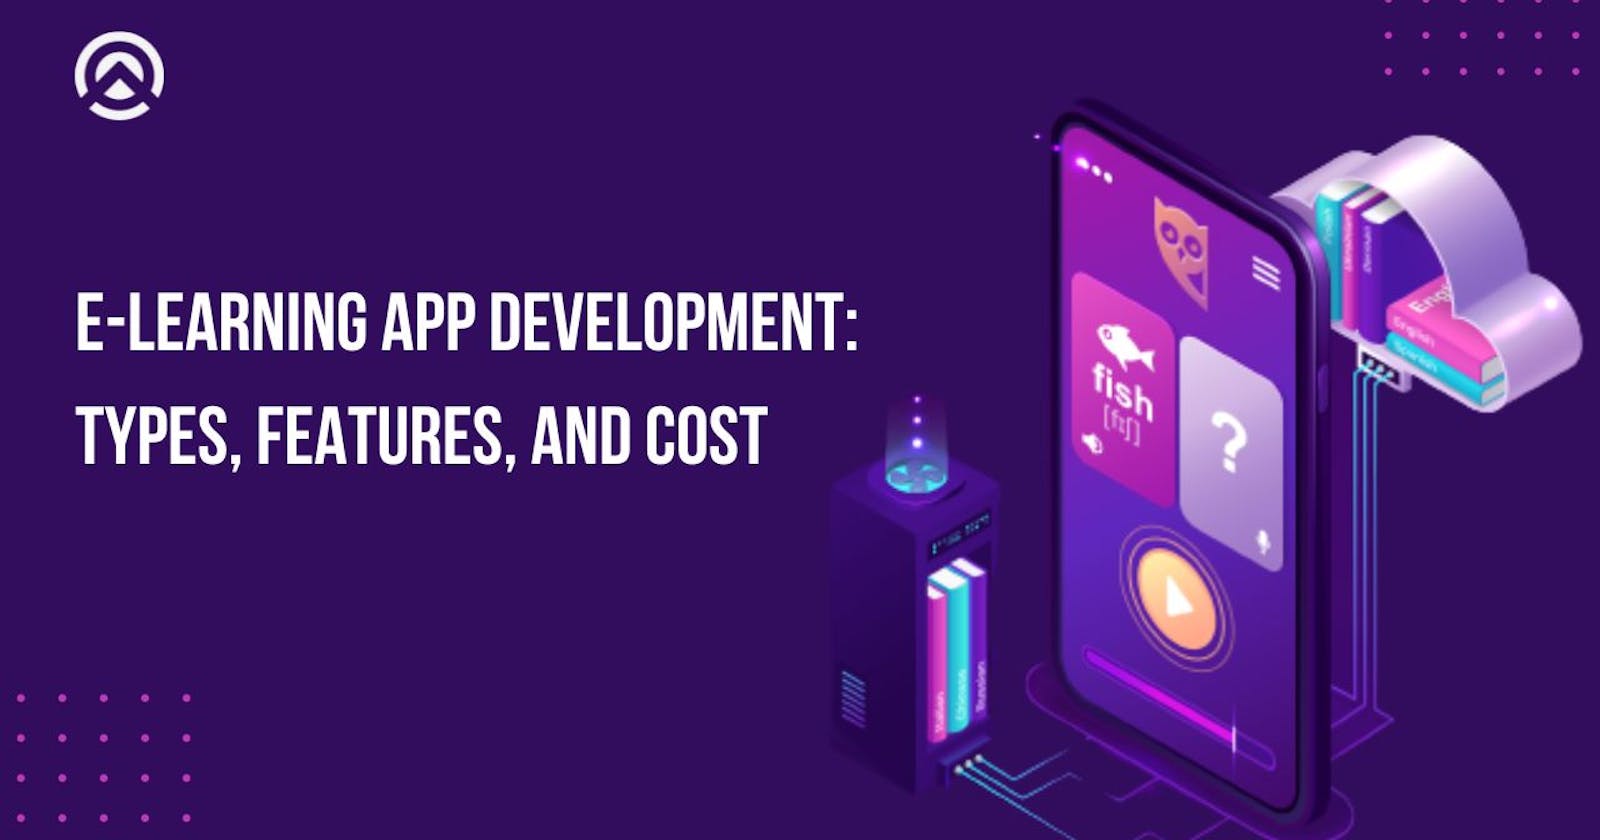 e-Learning App Development: Types, Features, and Cost